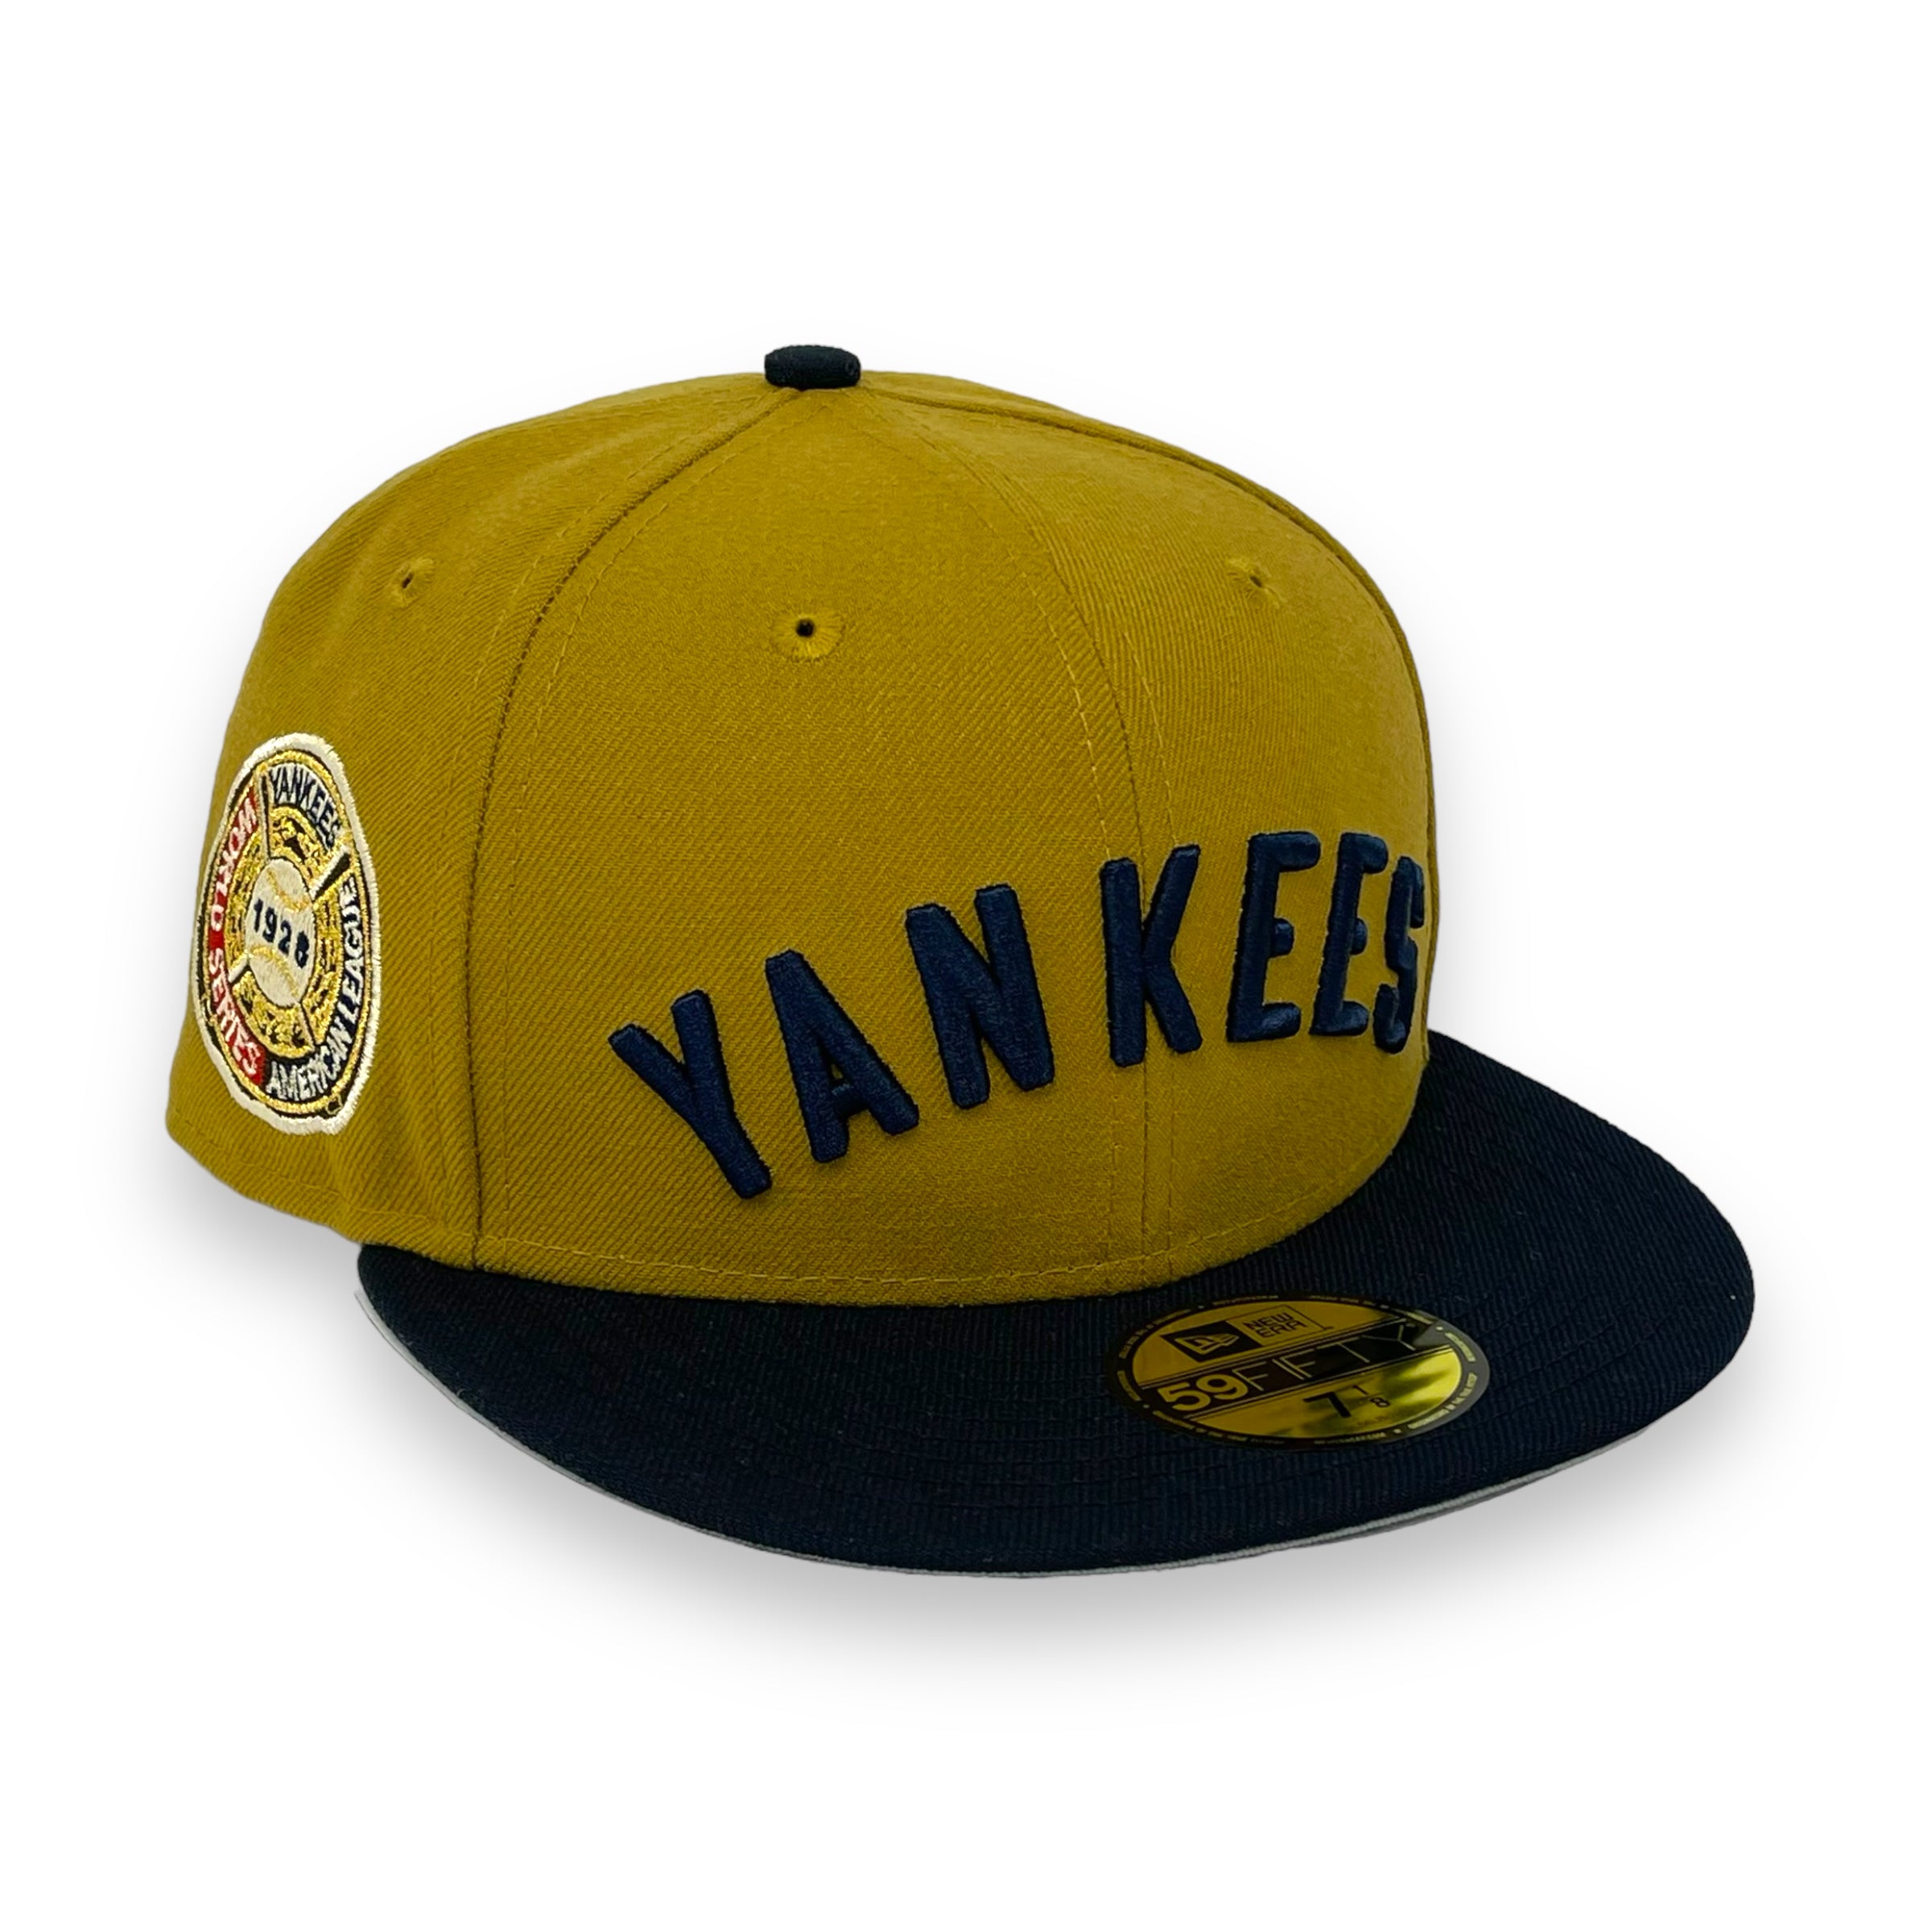 NEW YORK YANKEES (OLD GOLD) (1928 WORLD SERIES) NEW ERA 59FIFTY FITTED (GREY UNDER VISOR)